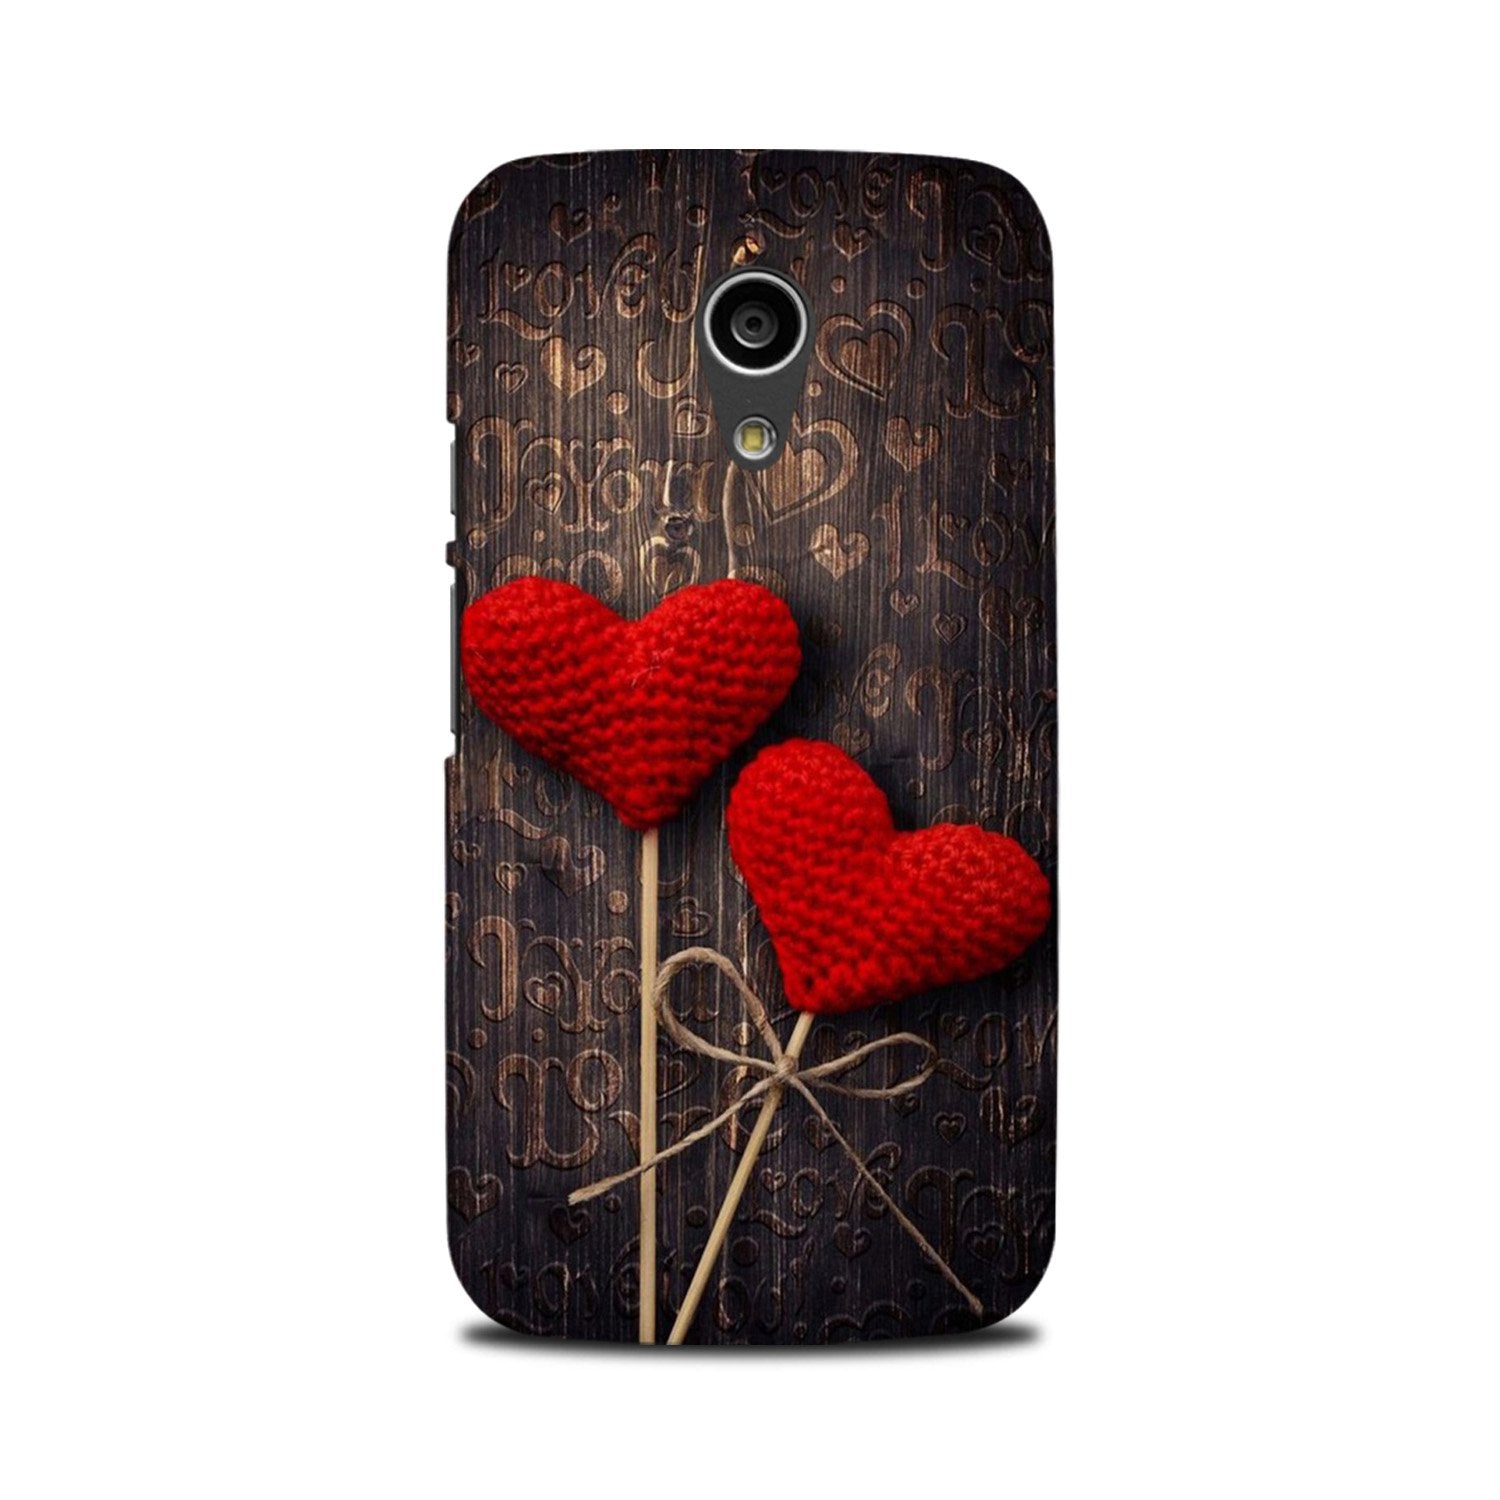 Red Hearts Case for Moto G2